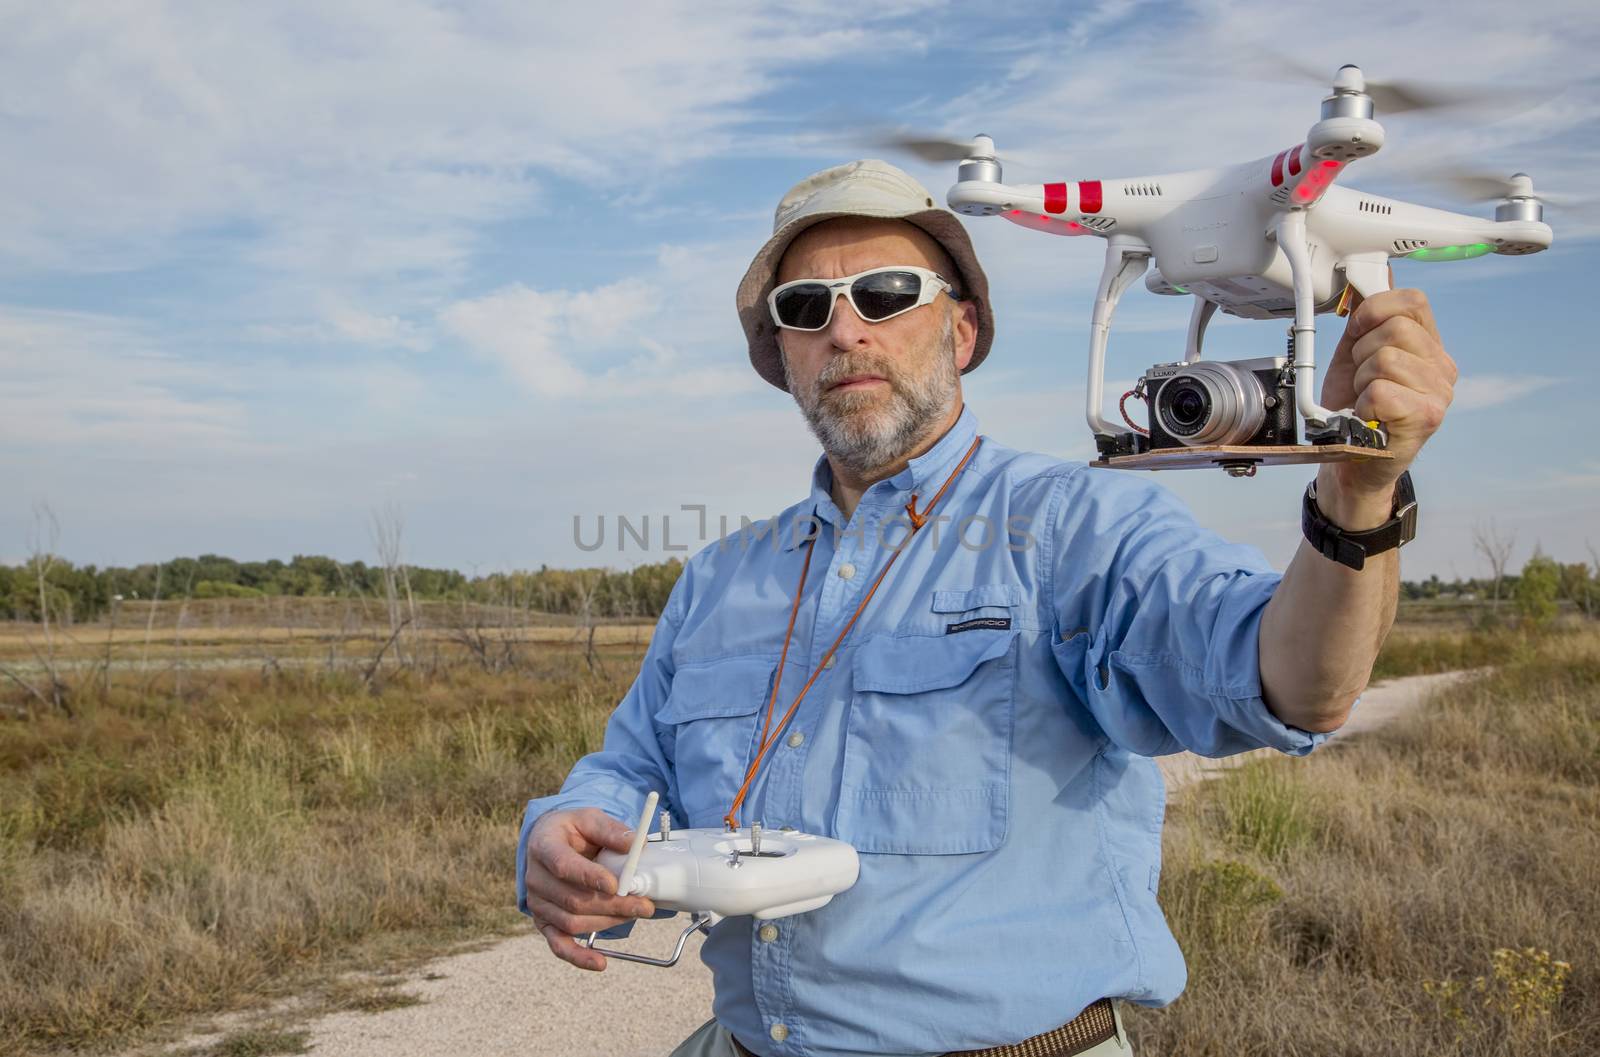 FORT COLLINS, CO, SEPTEMBER 28, 2014:  Photogrpaher, Marek Uliasz, is launching the DJI Phantom 2 quadcopter drone with Panasonic Lumix GM1 camera on board.